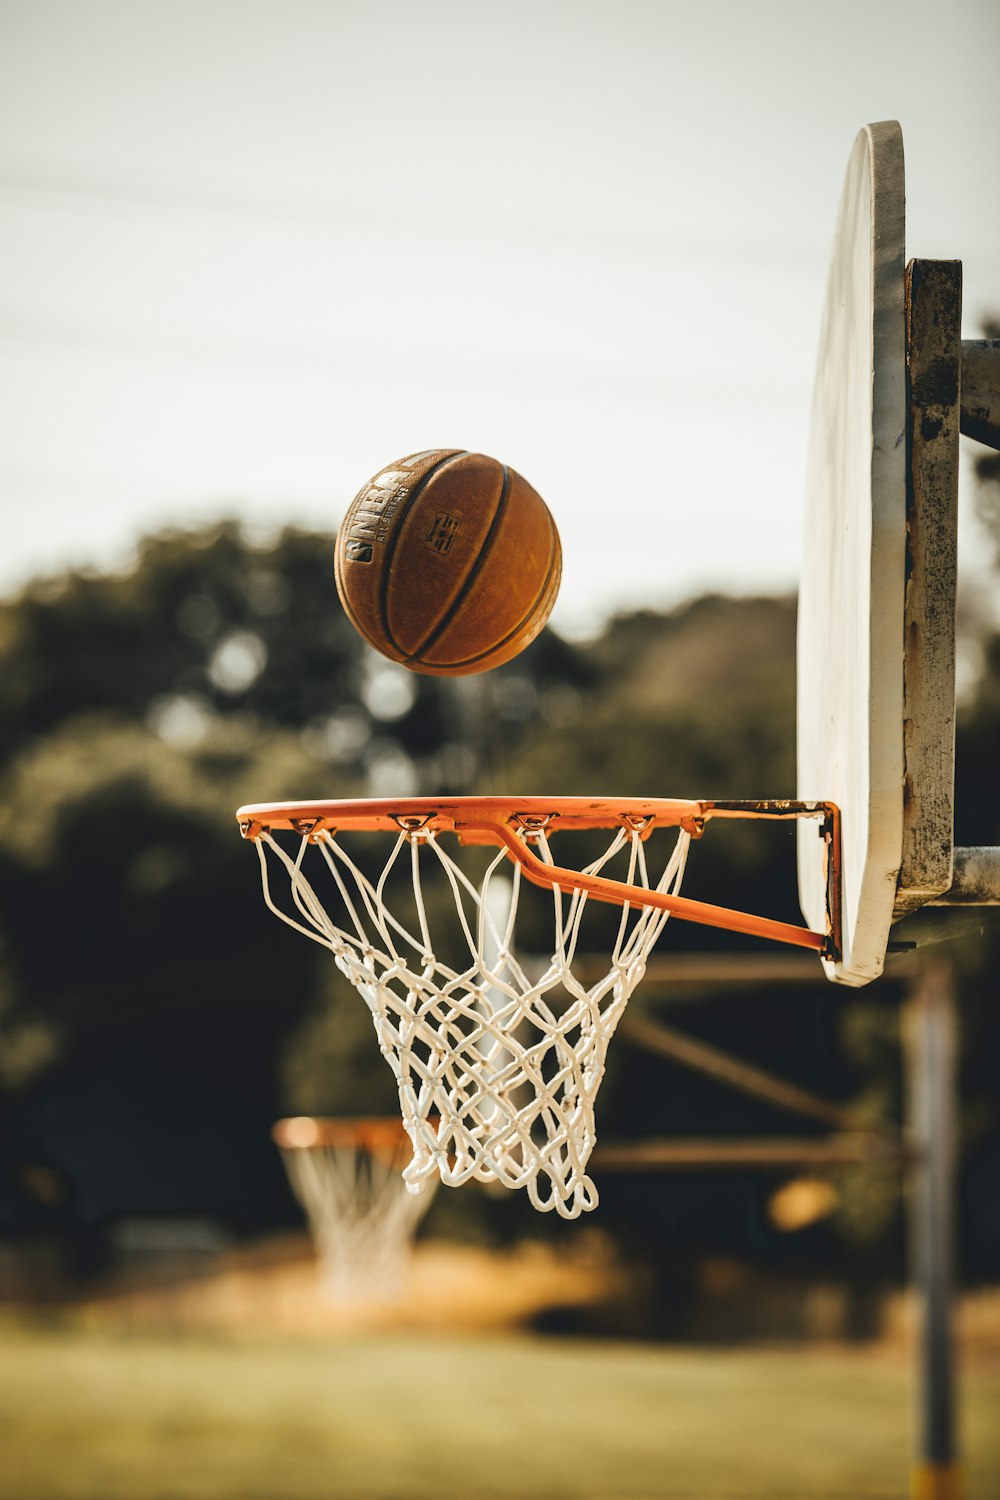 100+ Basketball Pictures | Download Free Images & Stock Photos on Unsplash